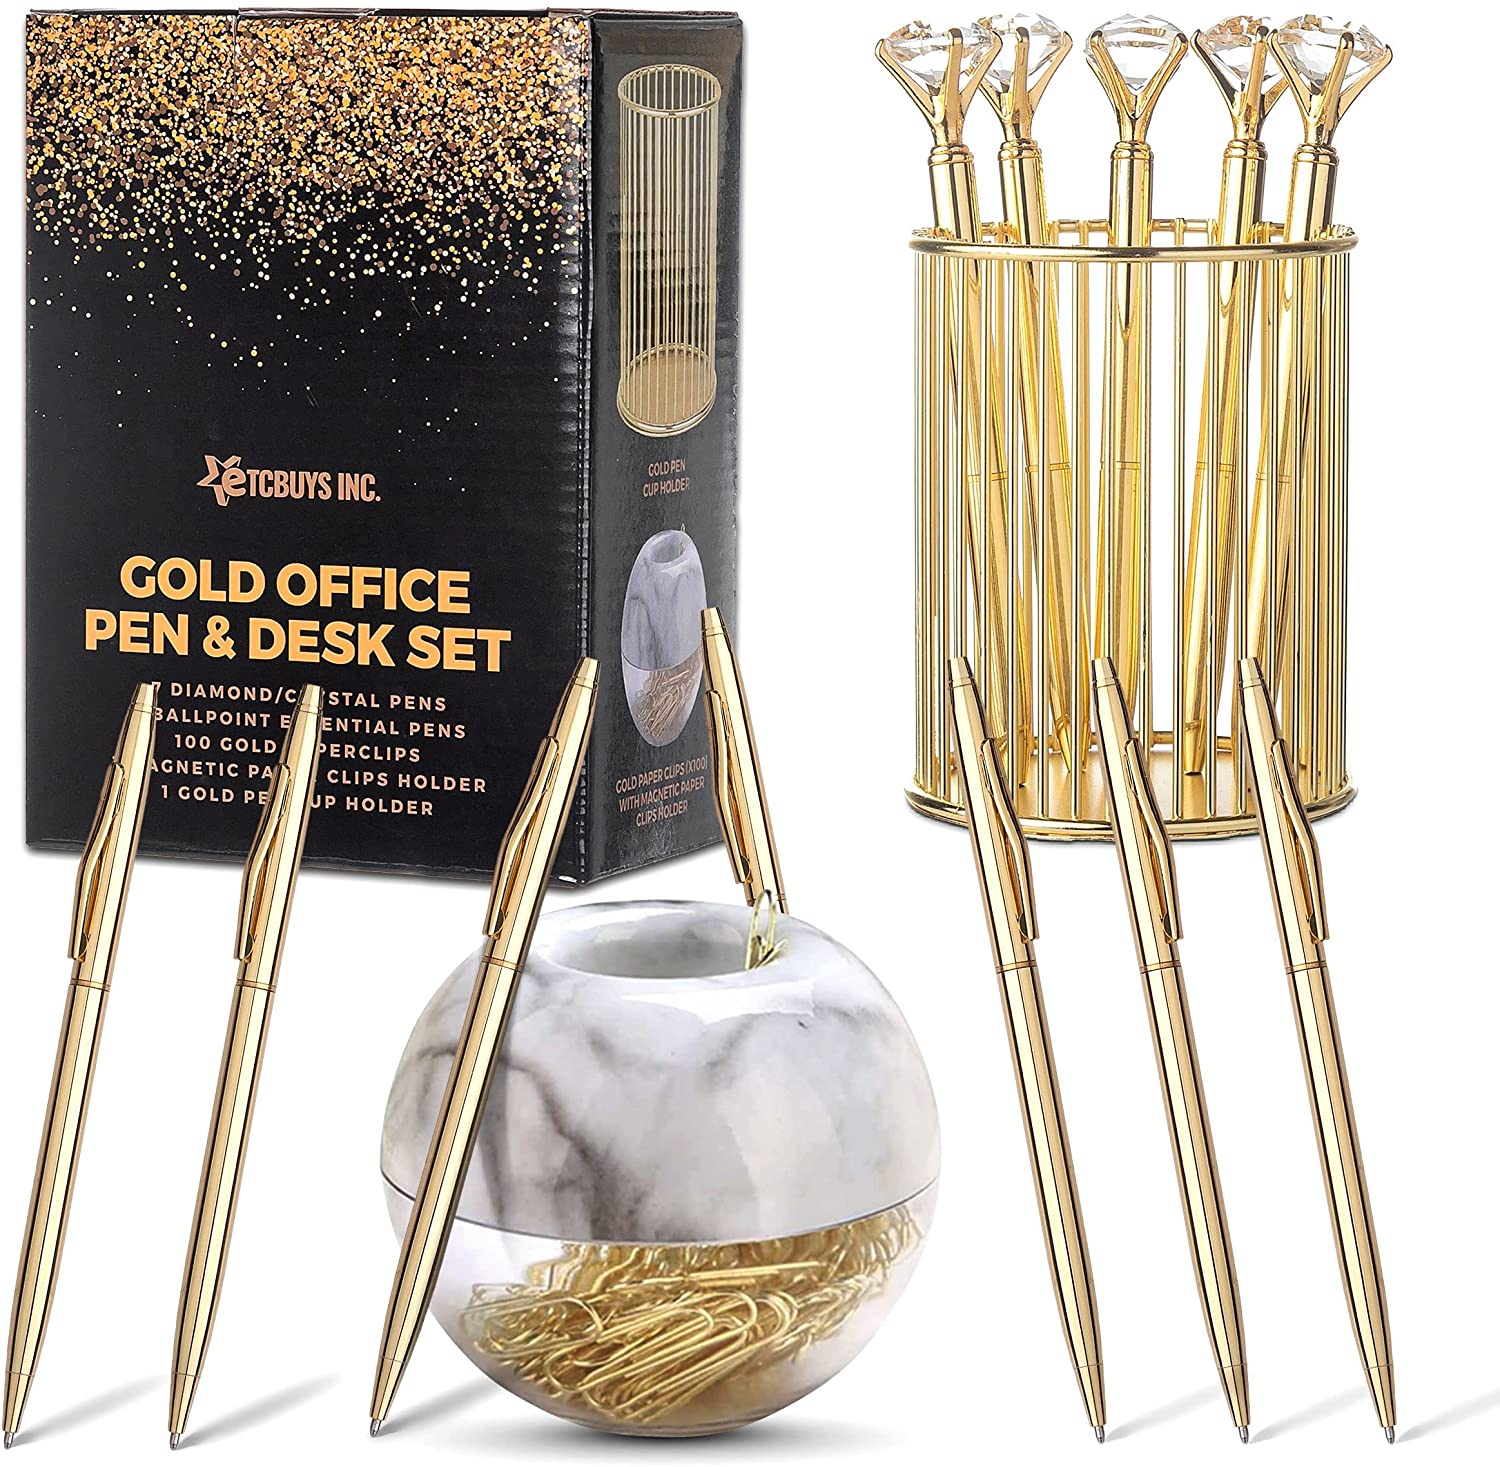 7 Diamond and 7 Slim Gold Pens & 1 Magnetic Paper Clip Holder with Paper Clips and Pen Cup Holder